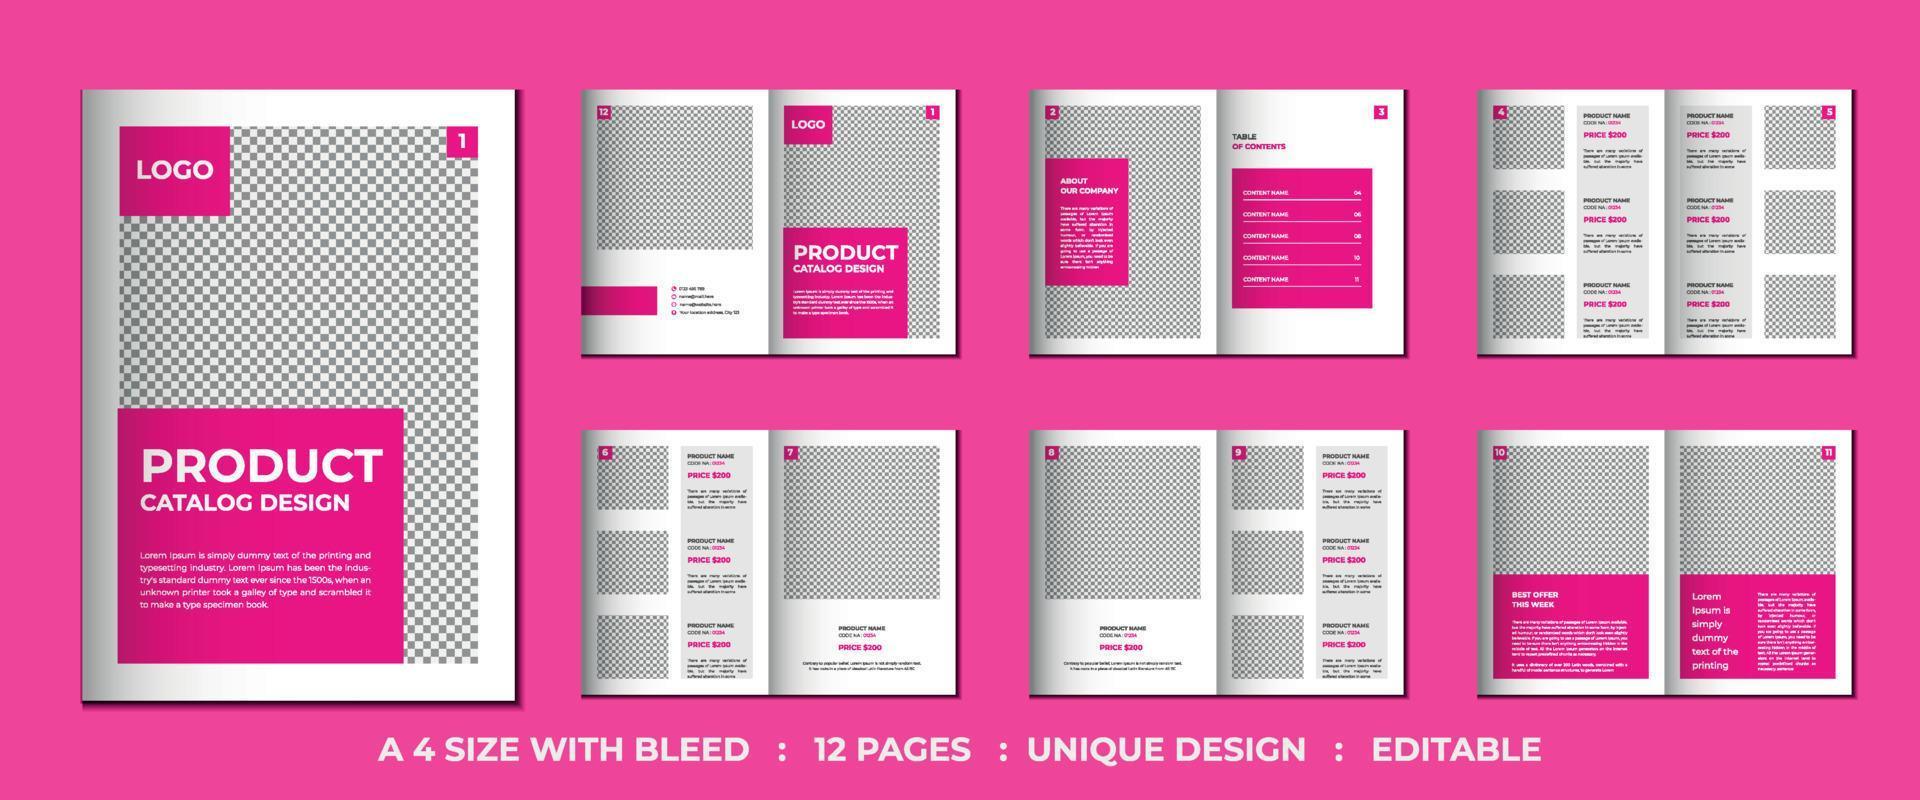 12 Pages company product catalog or portfolio template design vector